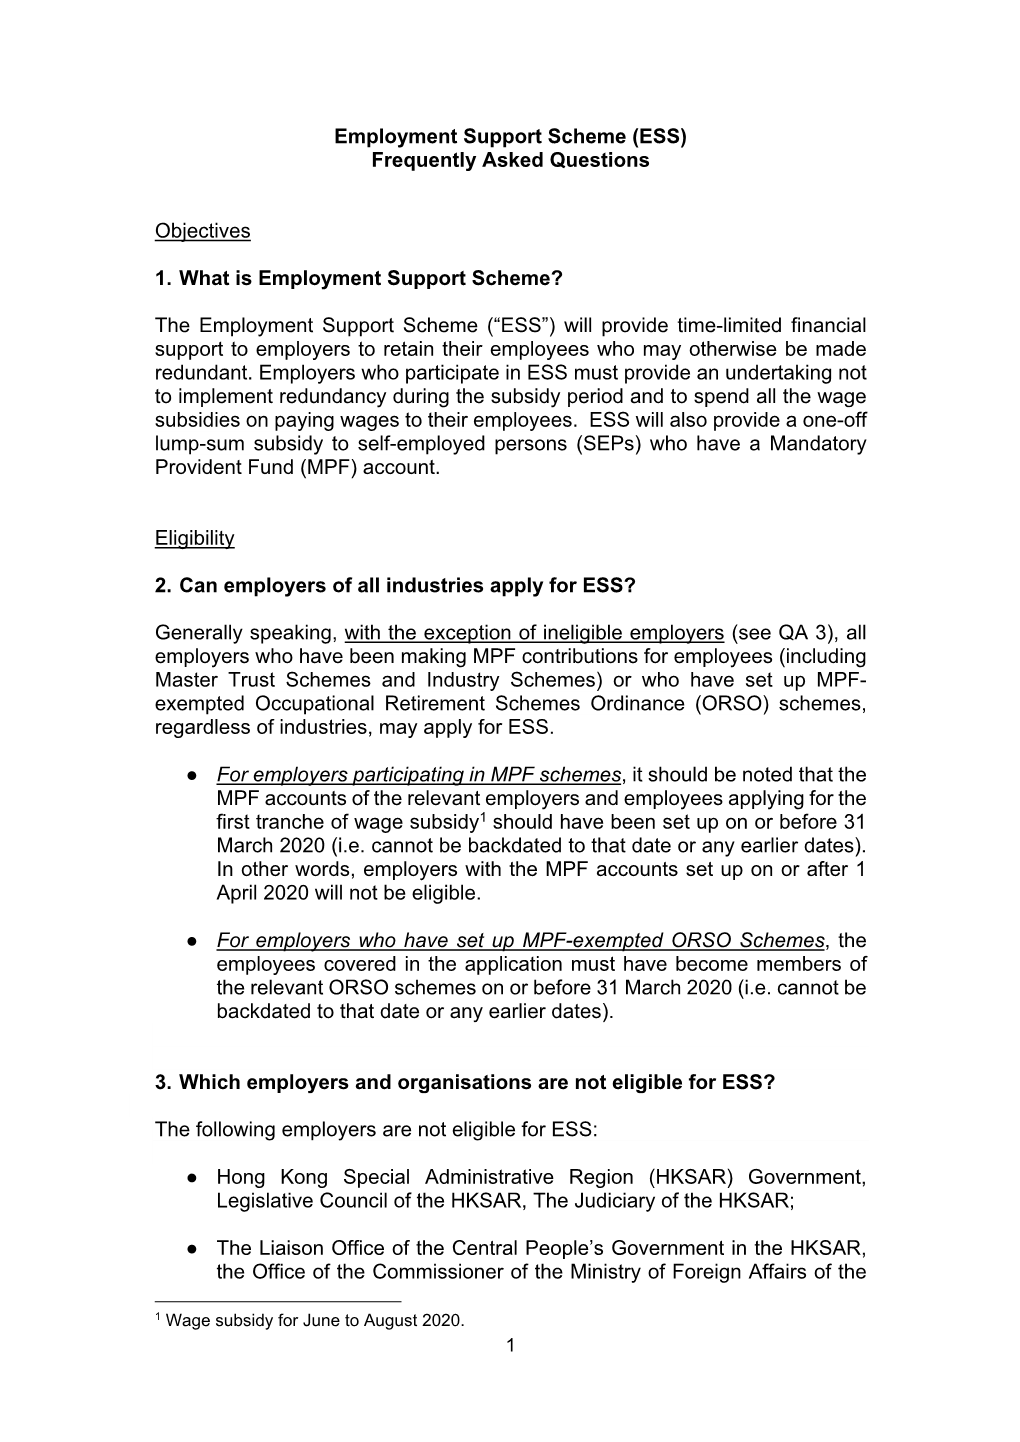 Employment Support Scheme (ESS) Frequently Asked Questions